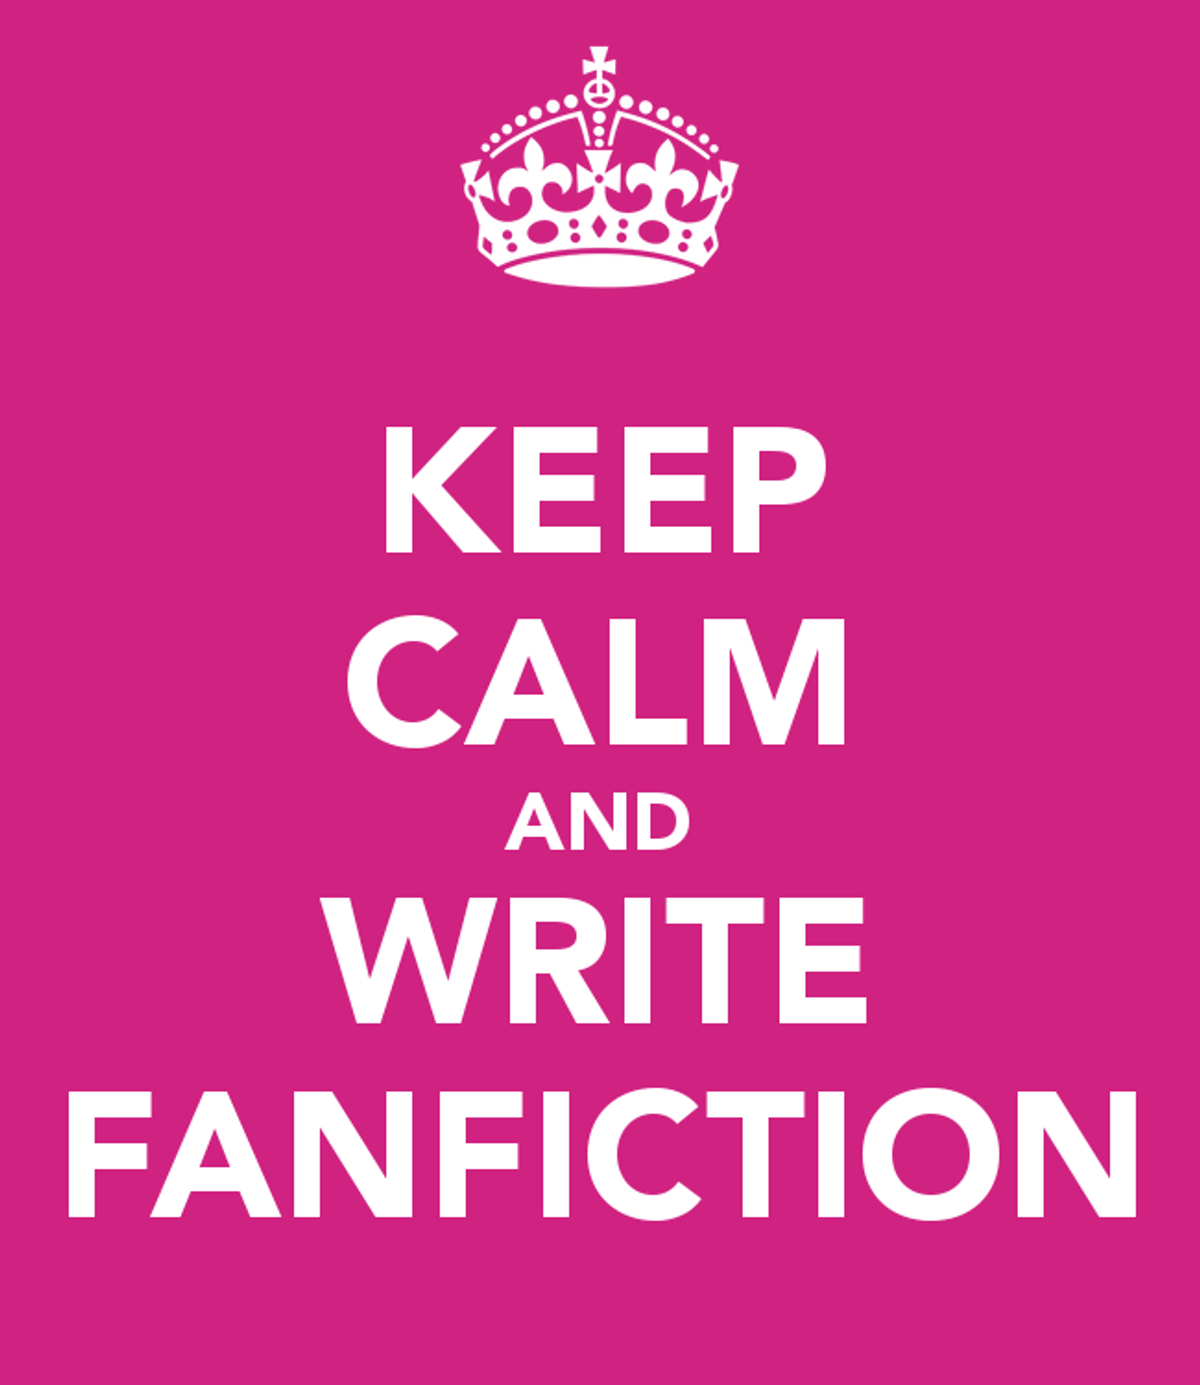 The Benefits of Writing Fanfiction